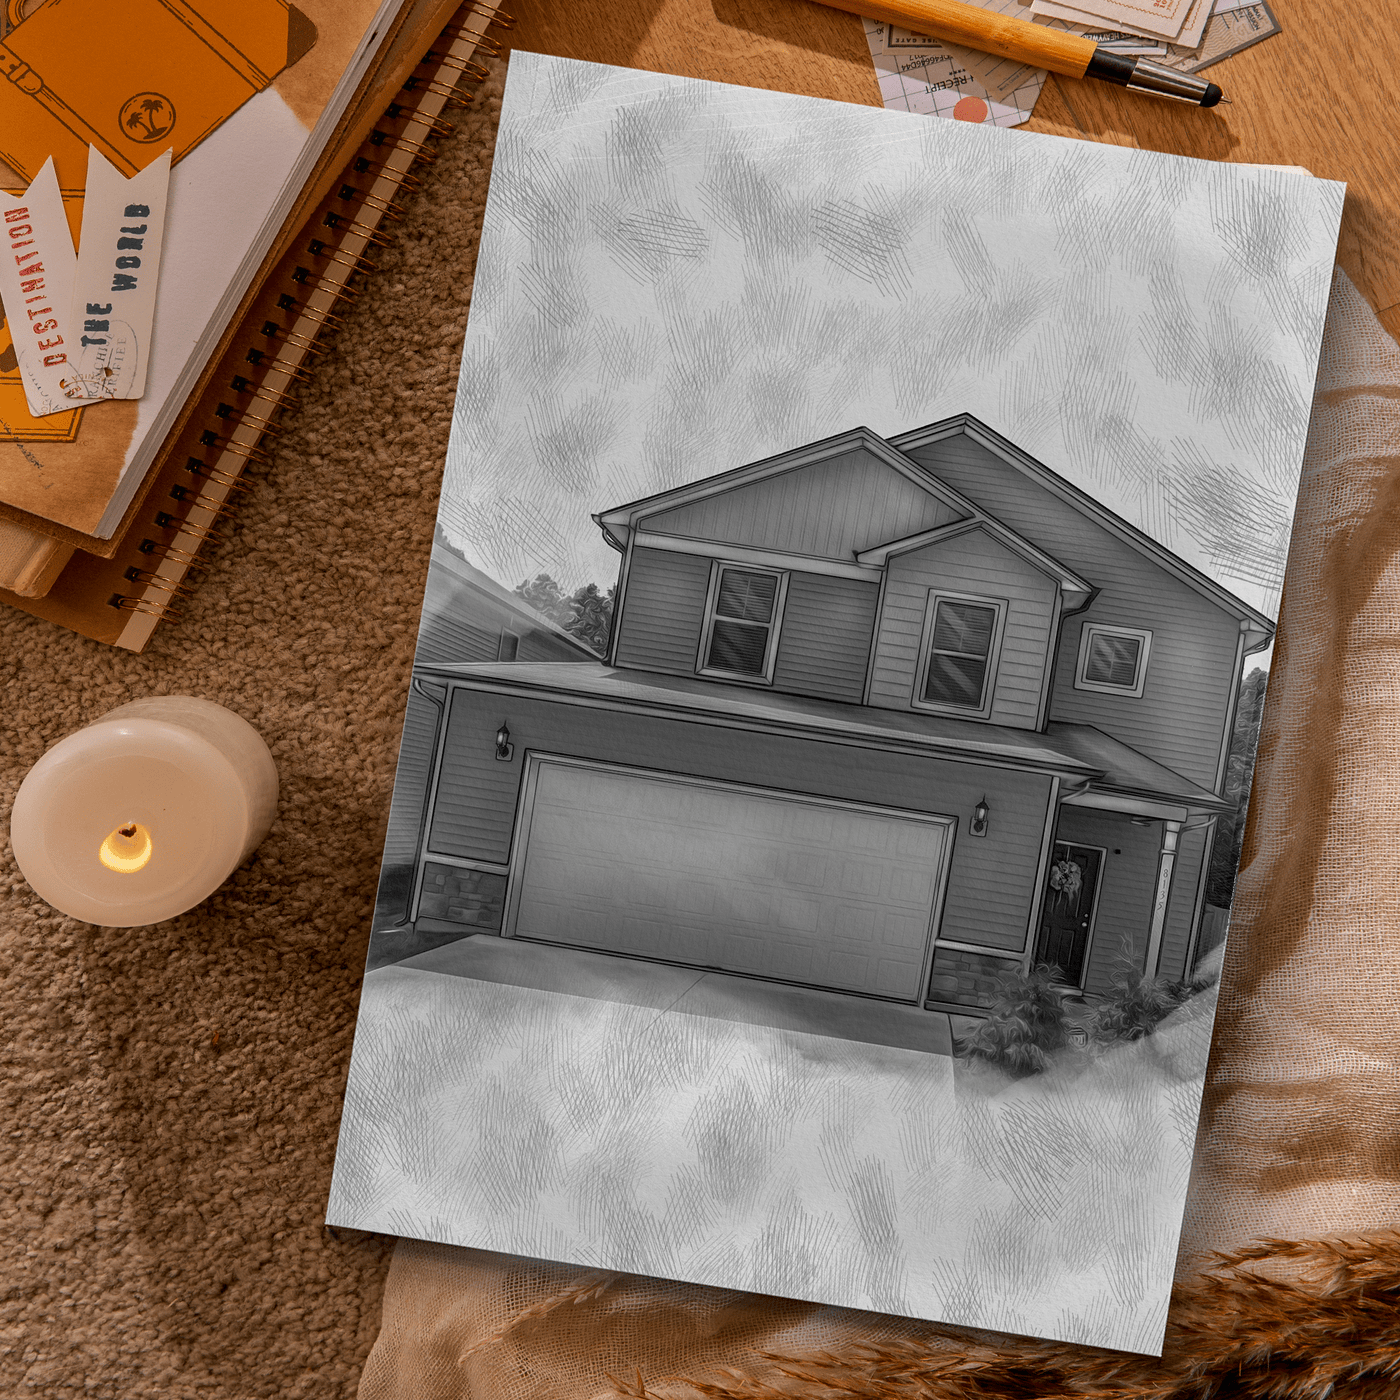 charcoal house drawing of an amazing house for a family